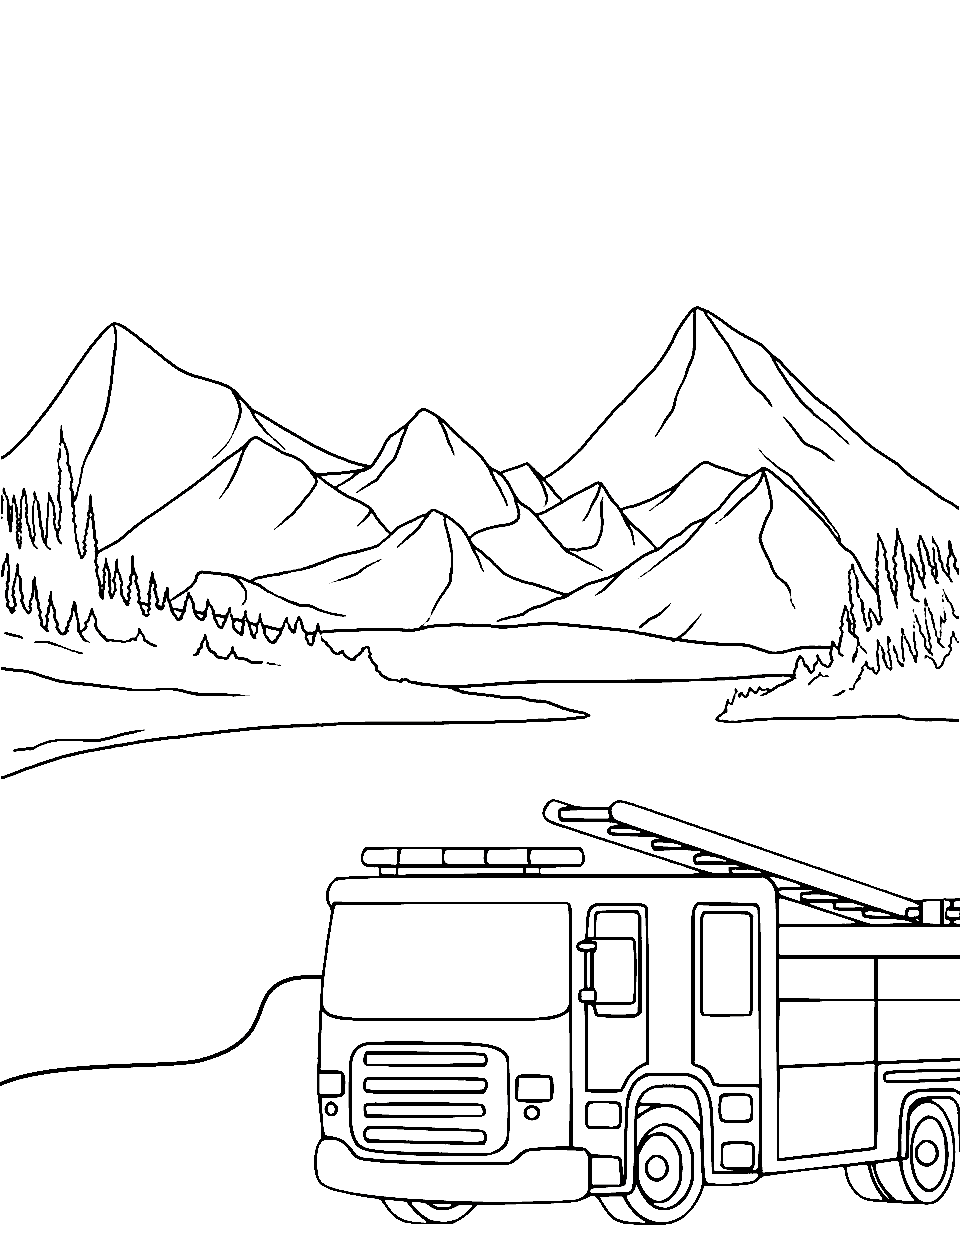 Lakeside Fire Truck Coloring Page - A fire truck parked next to a lake.